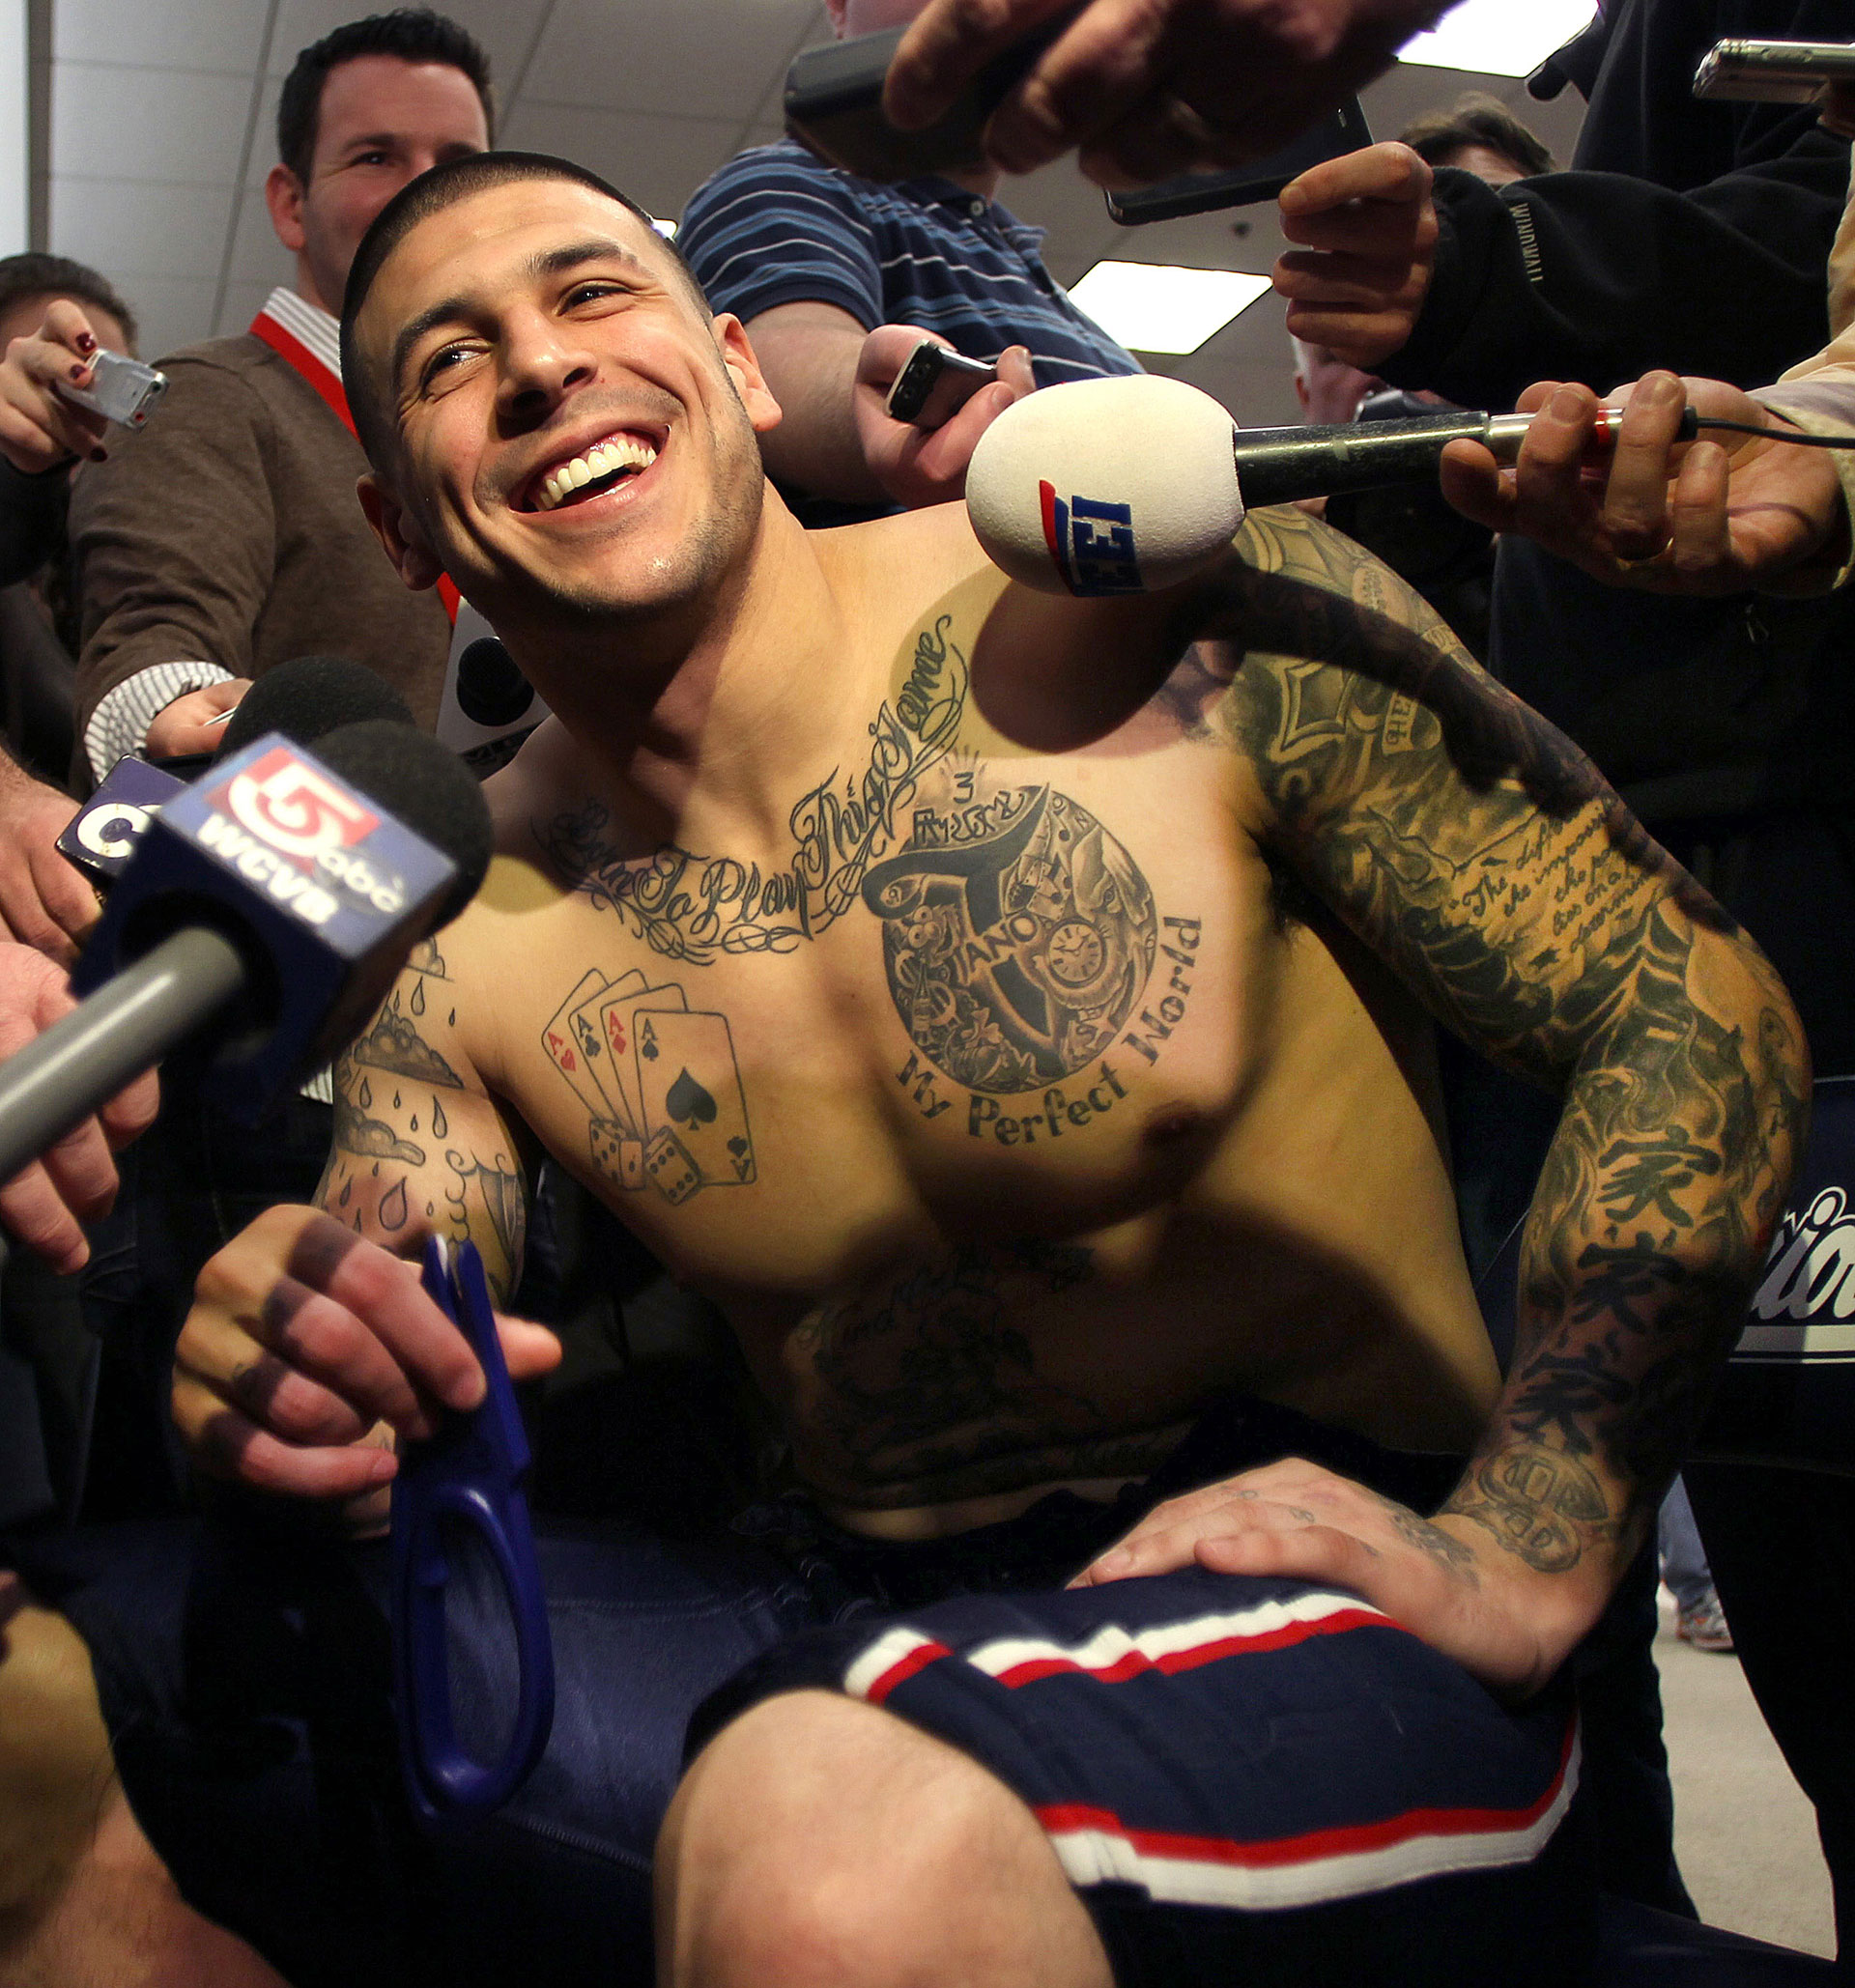 MY PERFECT WORLD: THE AARON HERNANDEZ STORY